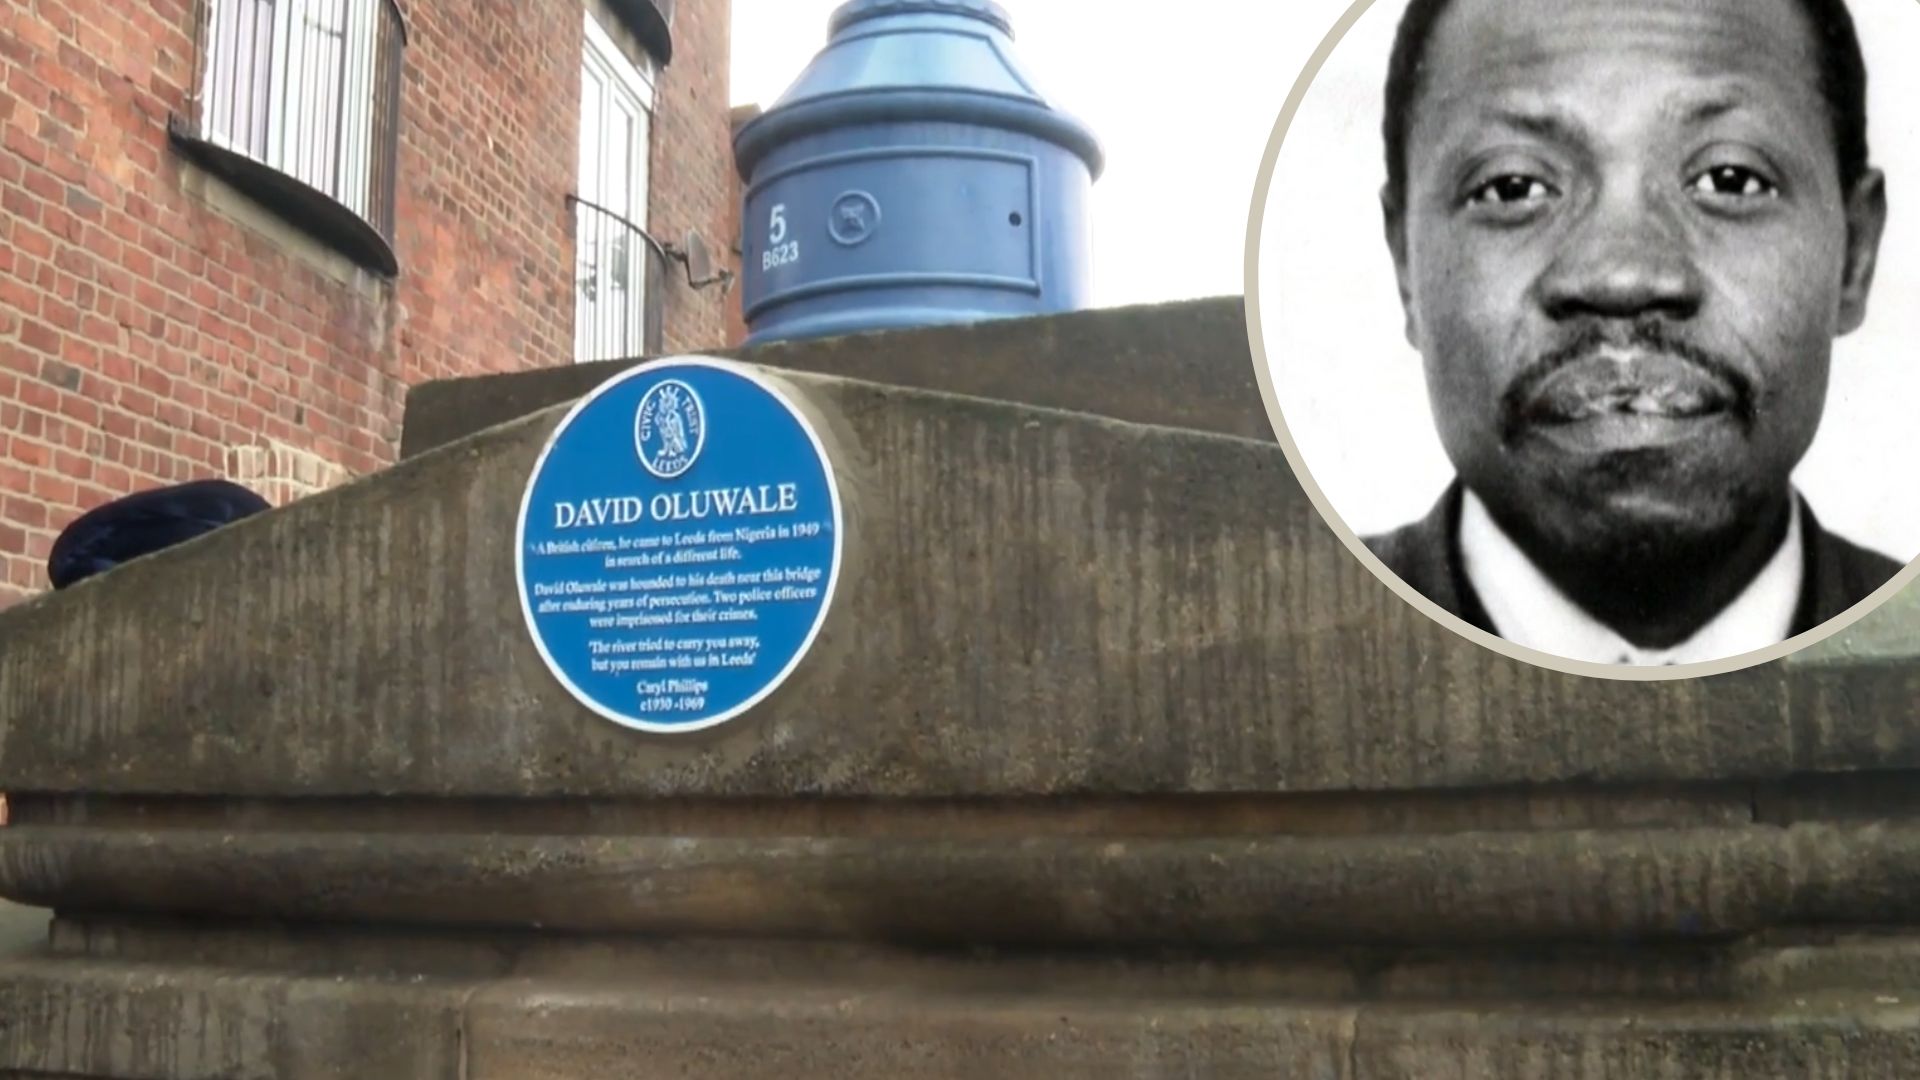 Man charged with David Oluwale replica plaque damage in Leeds